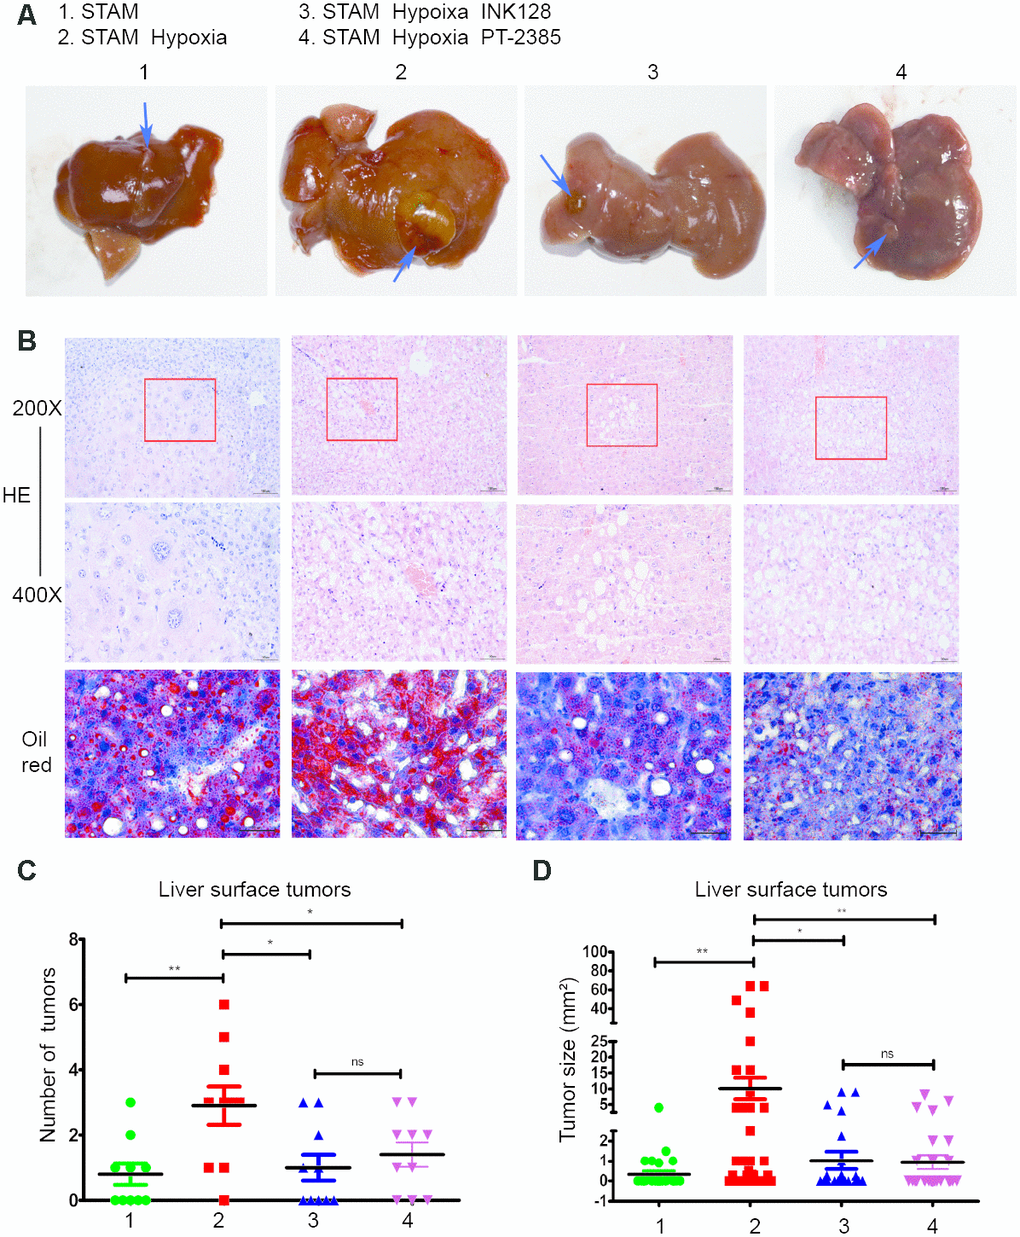 Hypoxia-induced HIF-2α overexpression promotes STAM mouse tumour development and lipid accumulation in vivo, which can be rescued by an mTOR inhibitor. (A). Gross specimens from STAM mice of different groups. (B) Images of liver stained by HE and Oil red O staining. (C) The numbers of tumours on the liver surface of different STAM mice (n = 10 mice/group). d. In the tumour size analysis, the largest three tumours found at a random location in the liver were used.